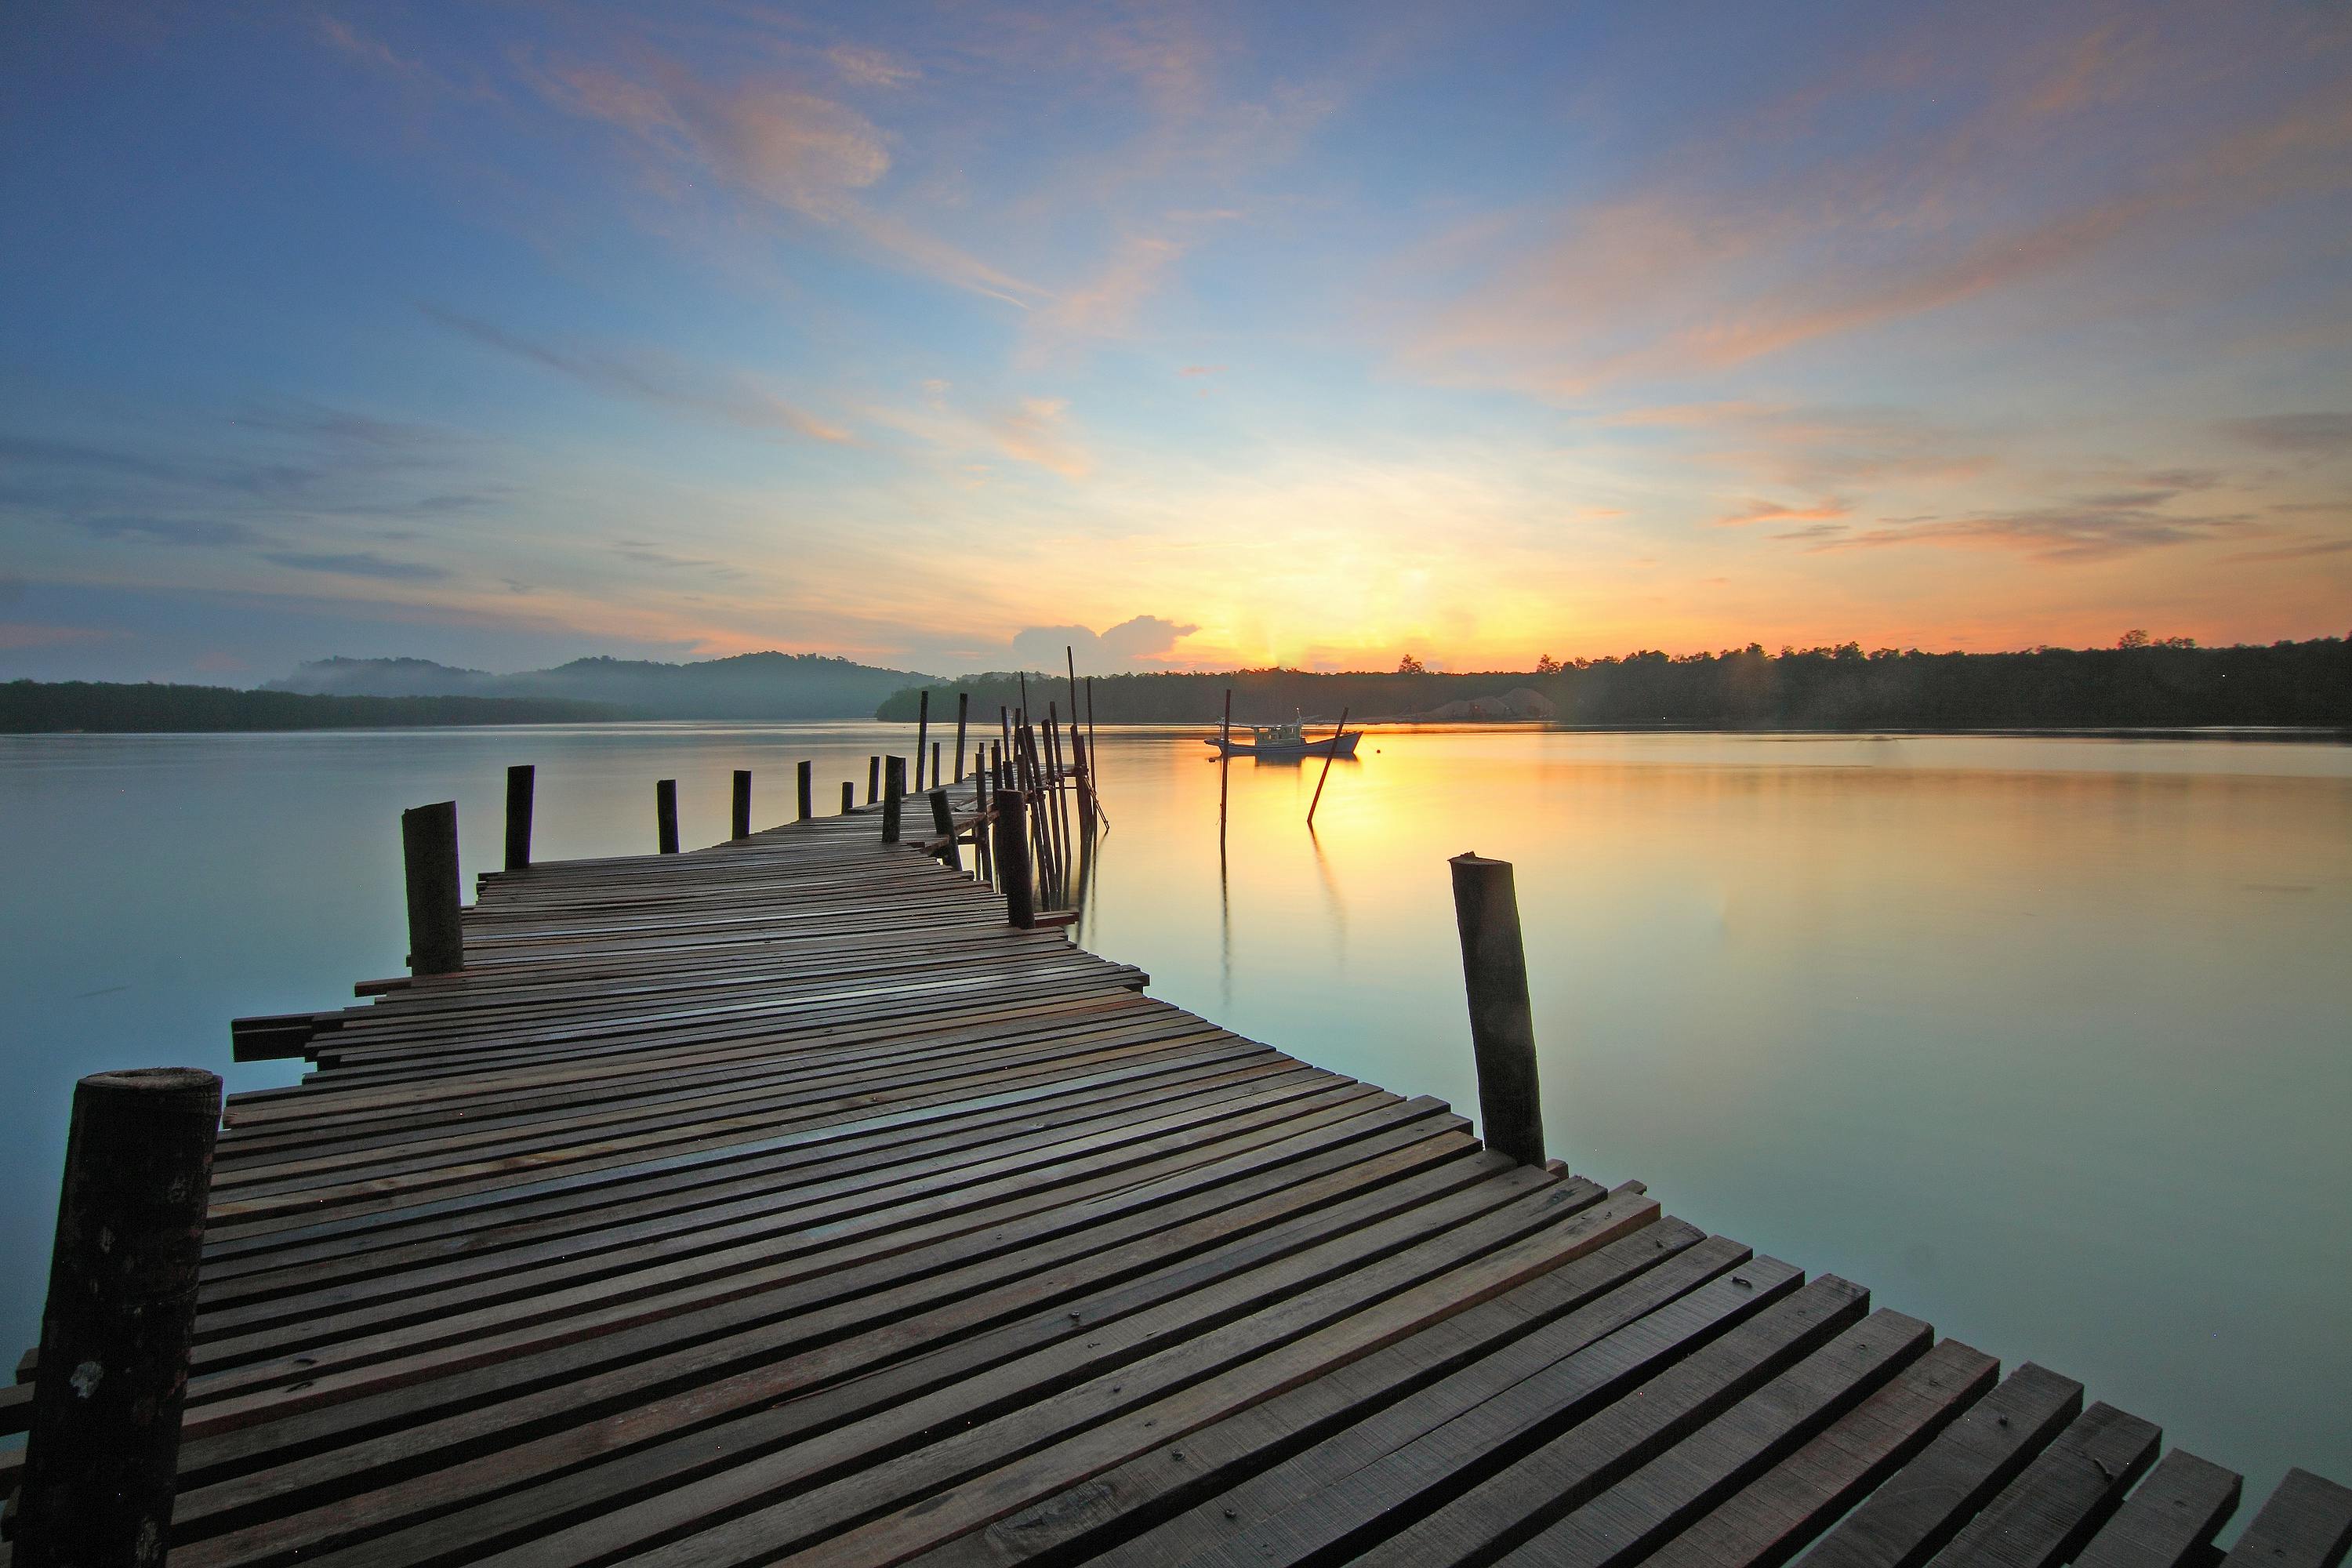 Brown Wooden Dock on Calm Body of Water Surrounded by ...